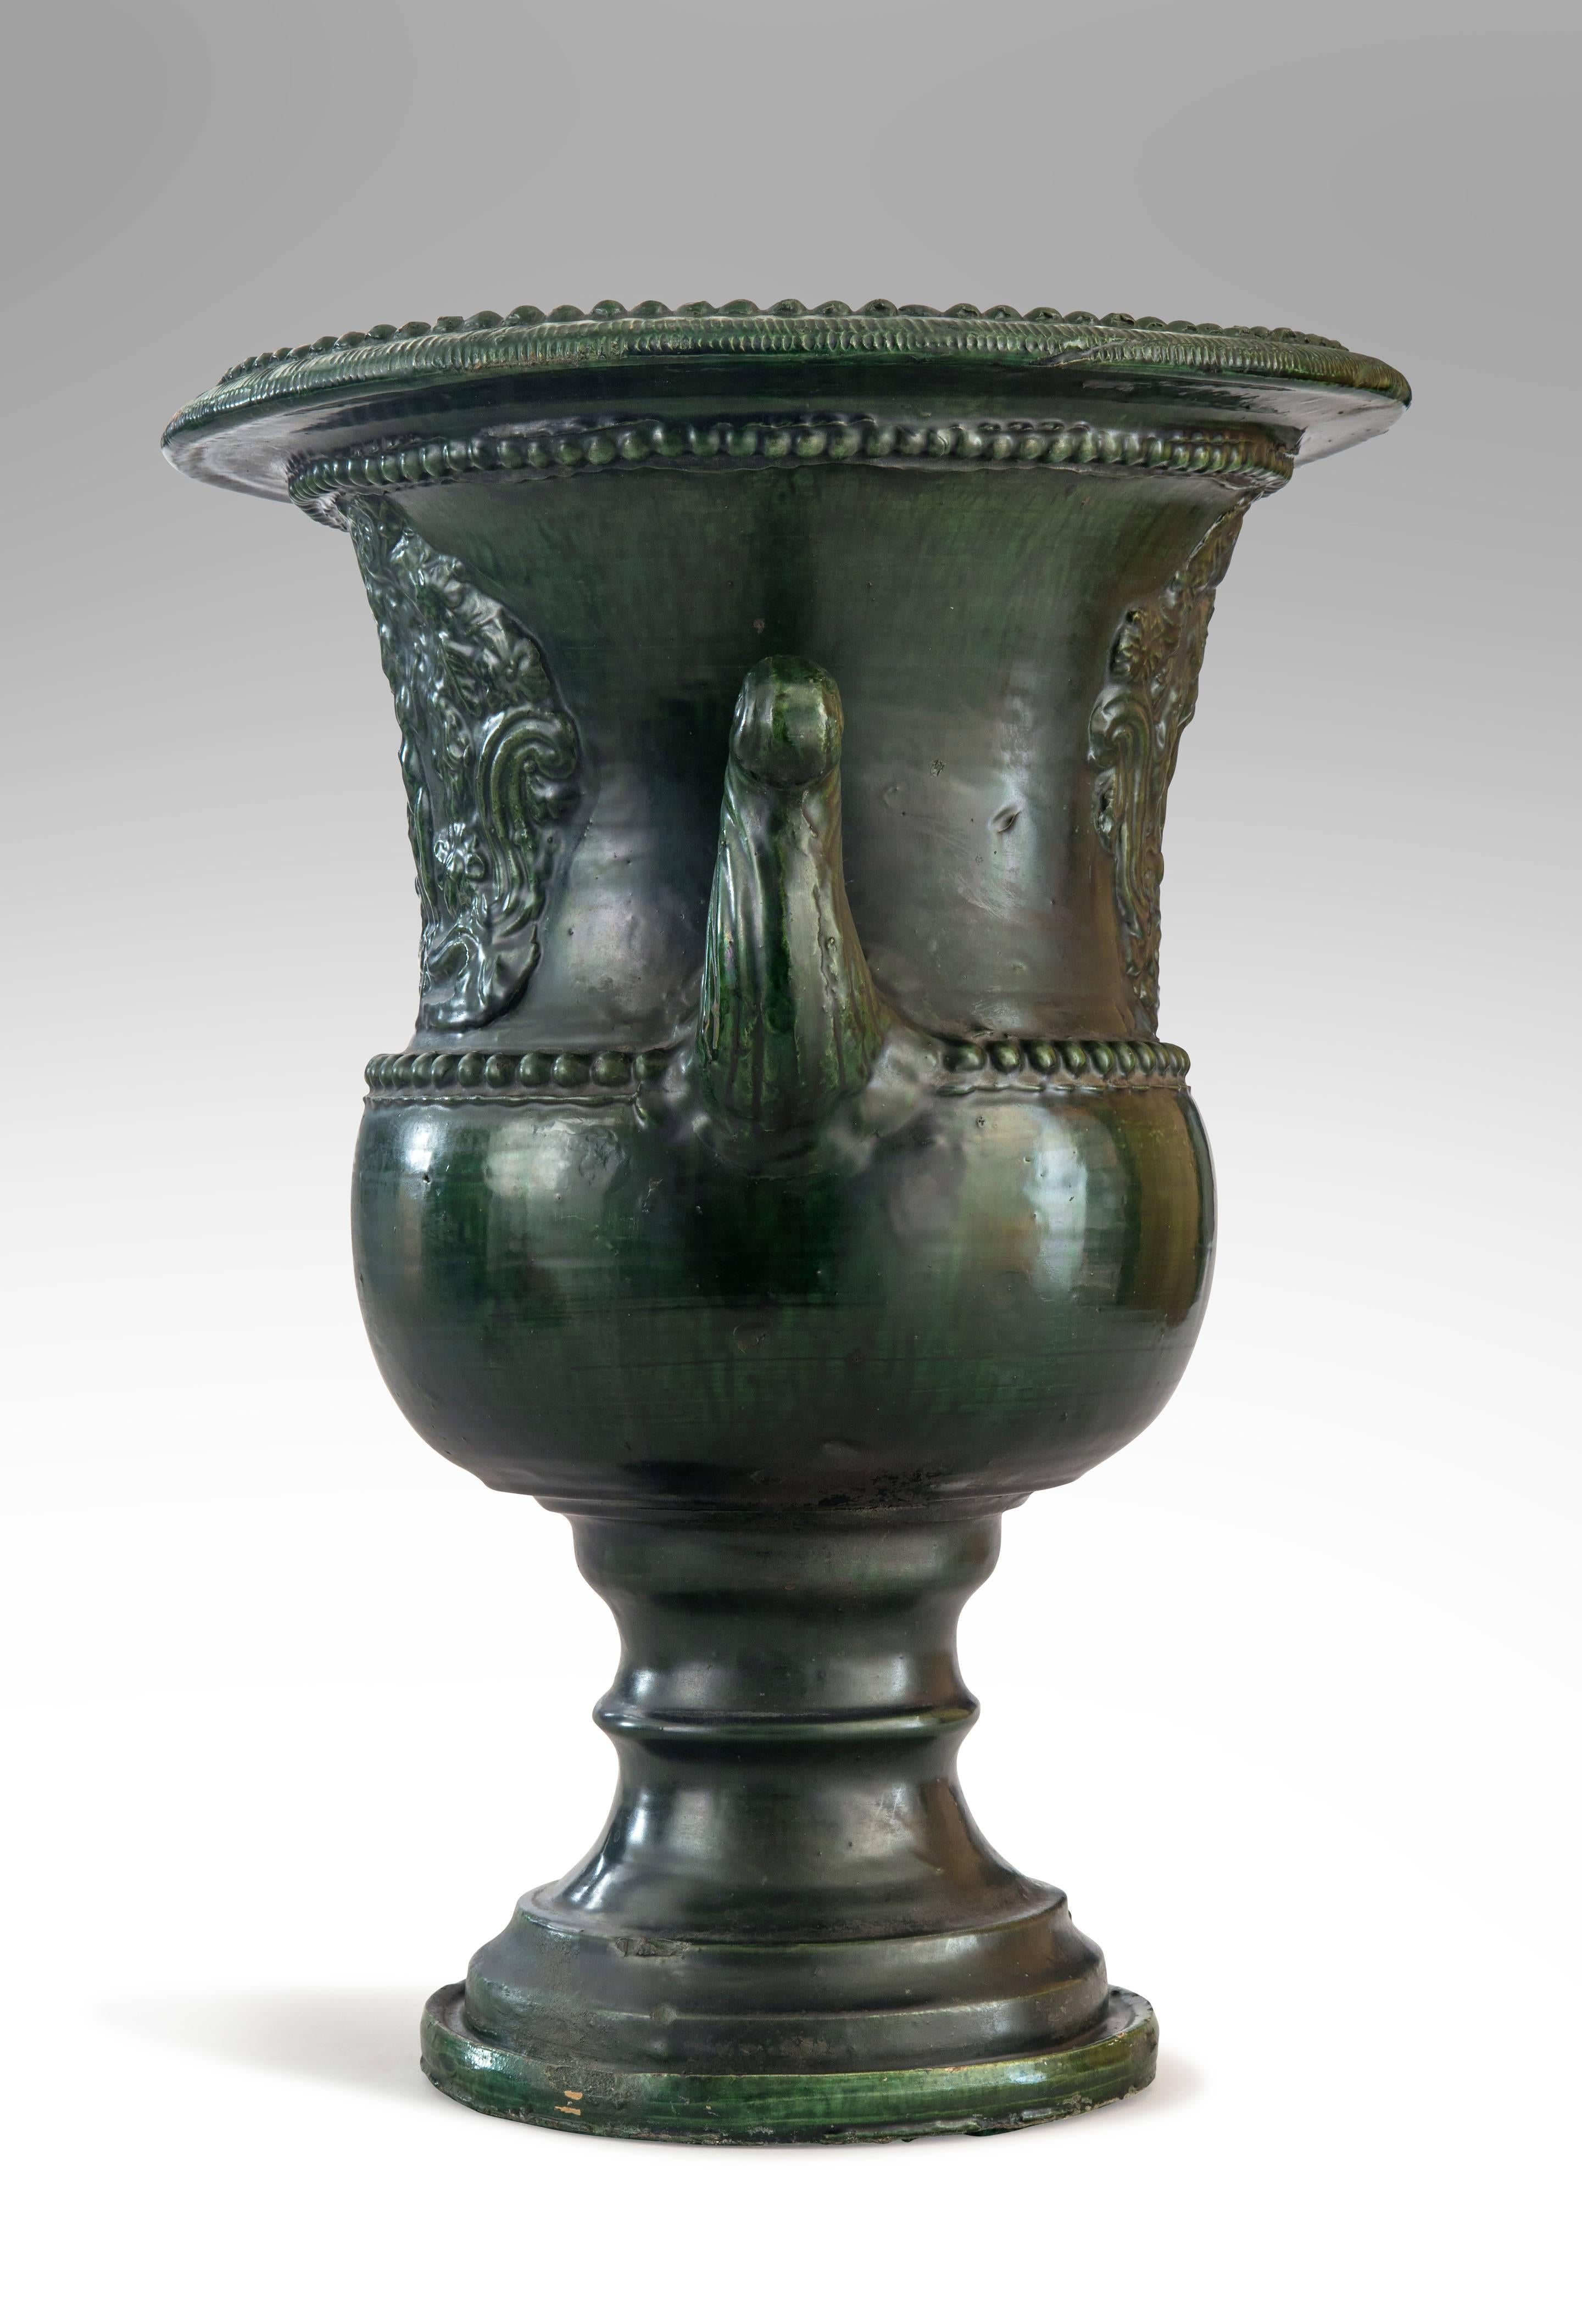 Beautiful modeling and richly glazed with a complex antique green. A French Green Glazed Faience Campana Urn with Classical Relief

Very good antique condition, ready to add to your collection. 